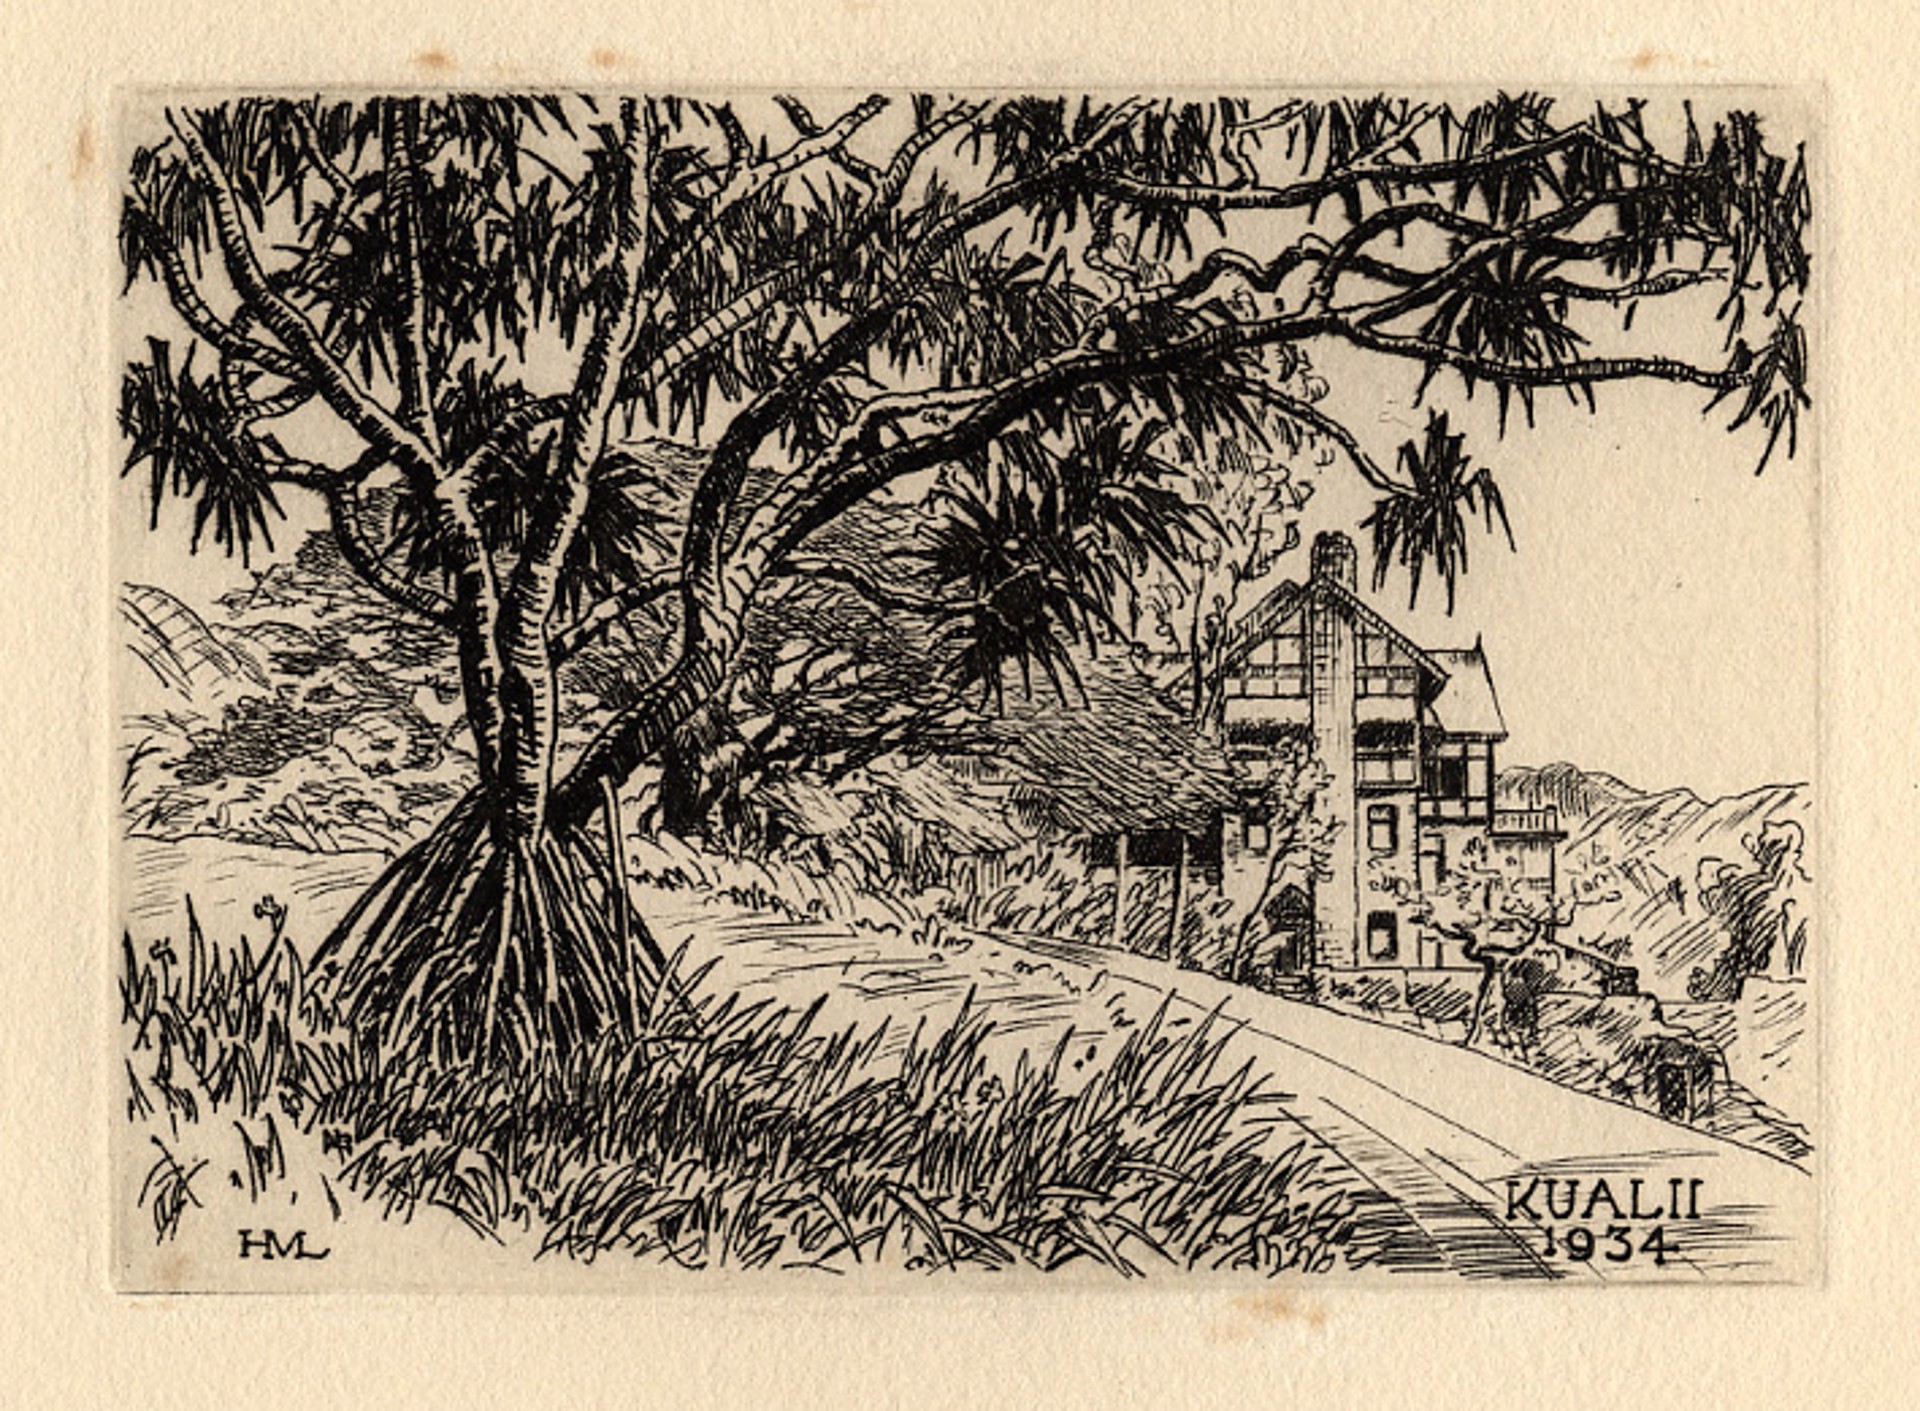 Kualii 1934 by Huc Mazelet Luquiens